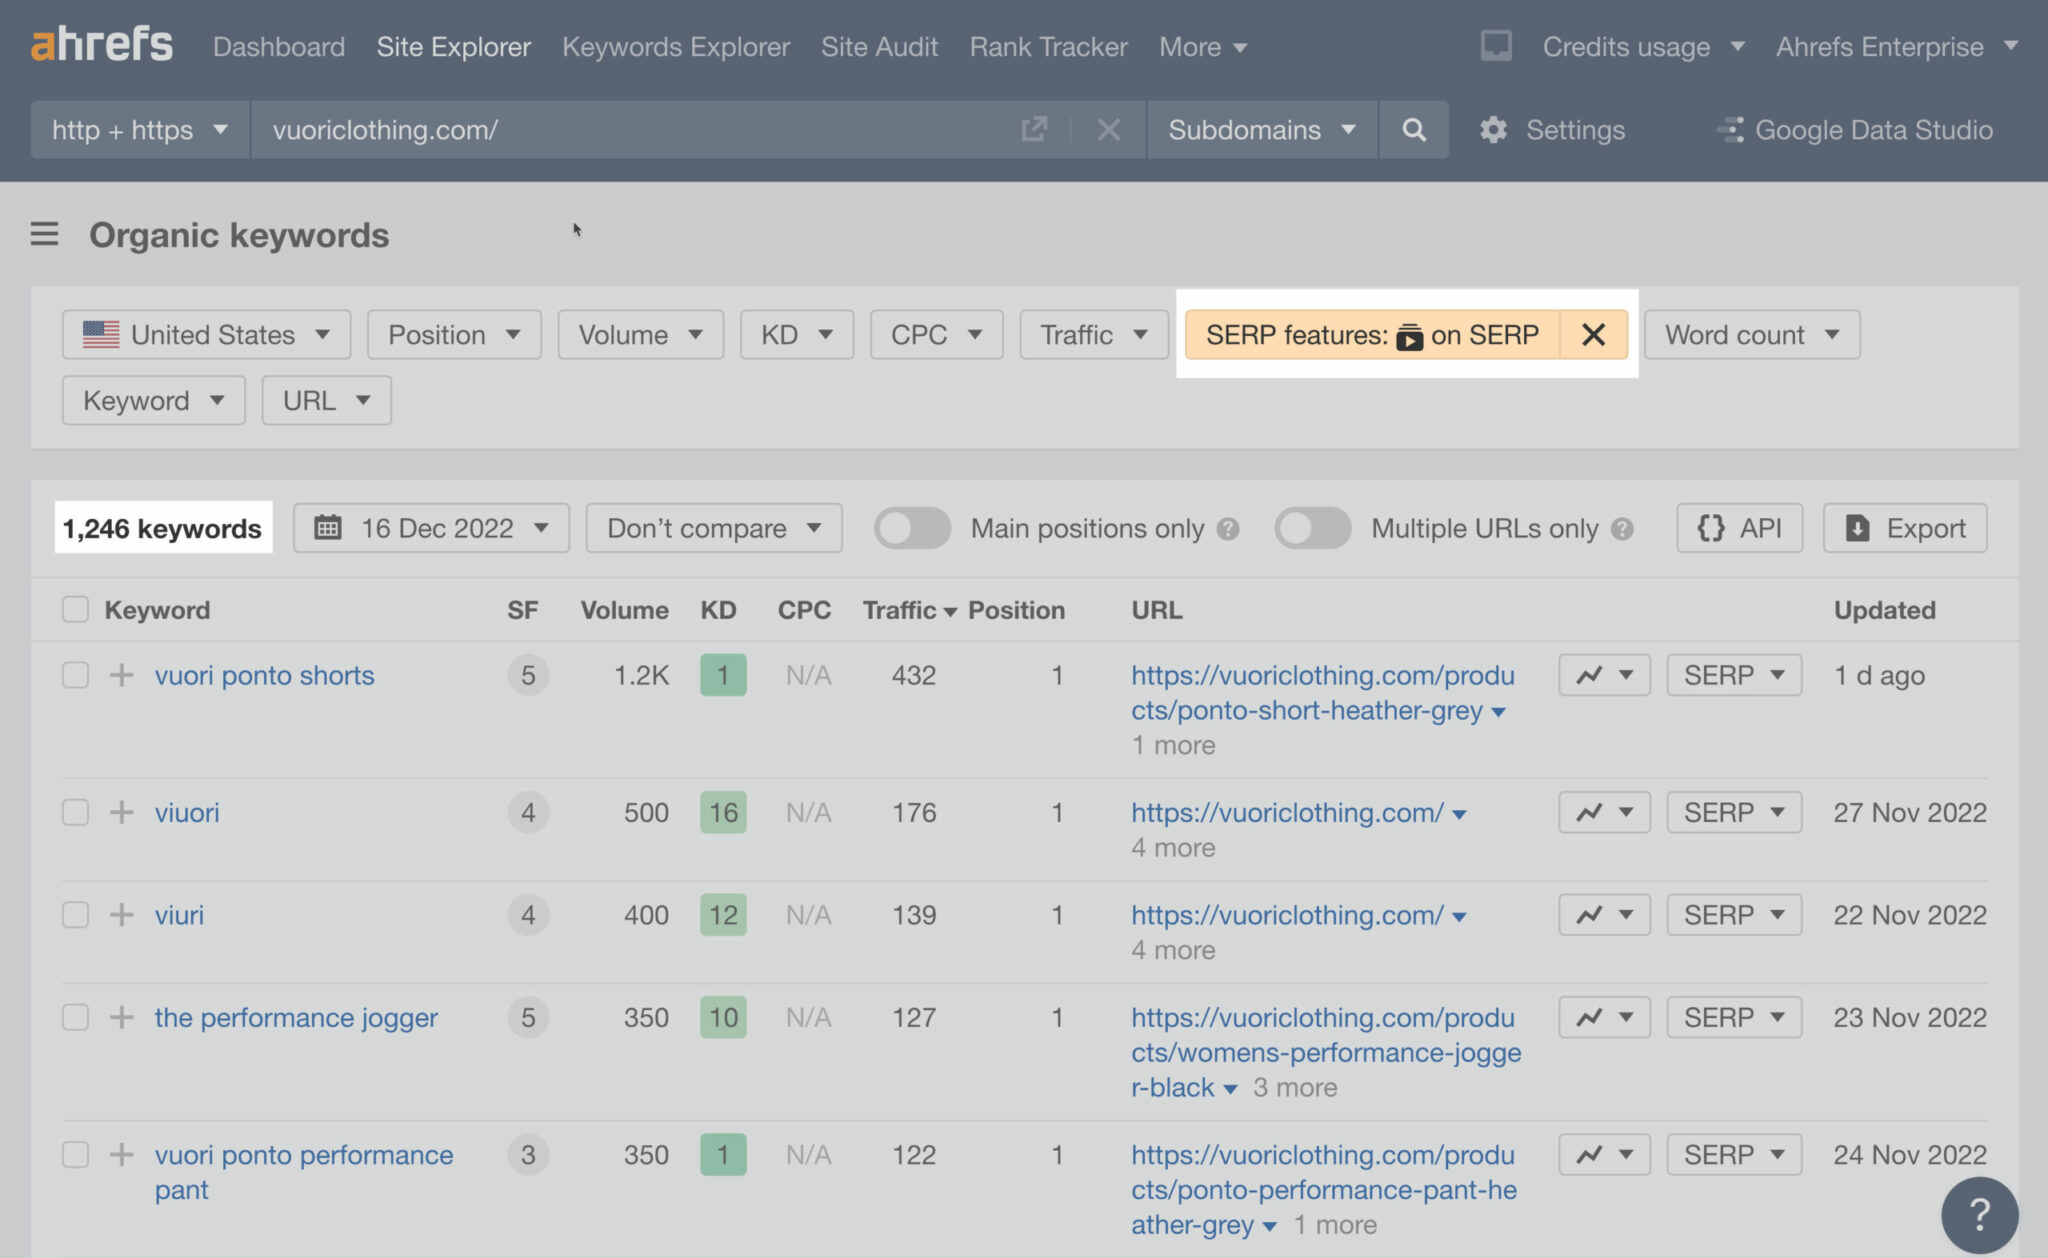 Filtering for organic keywords that trigger video results in Ahrefs ' Site Explorer